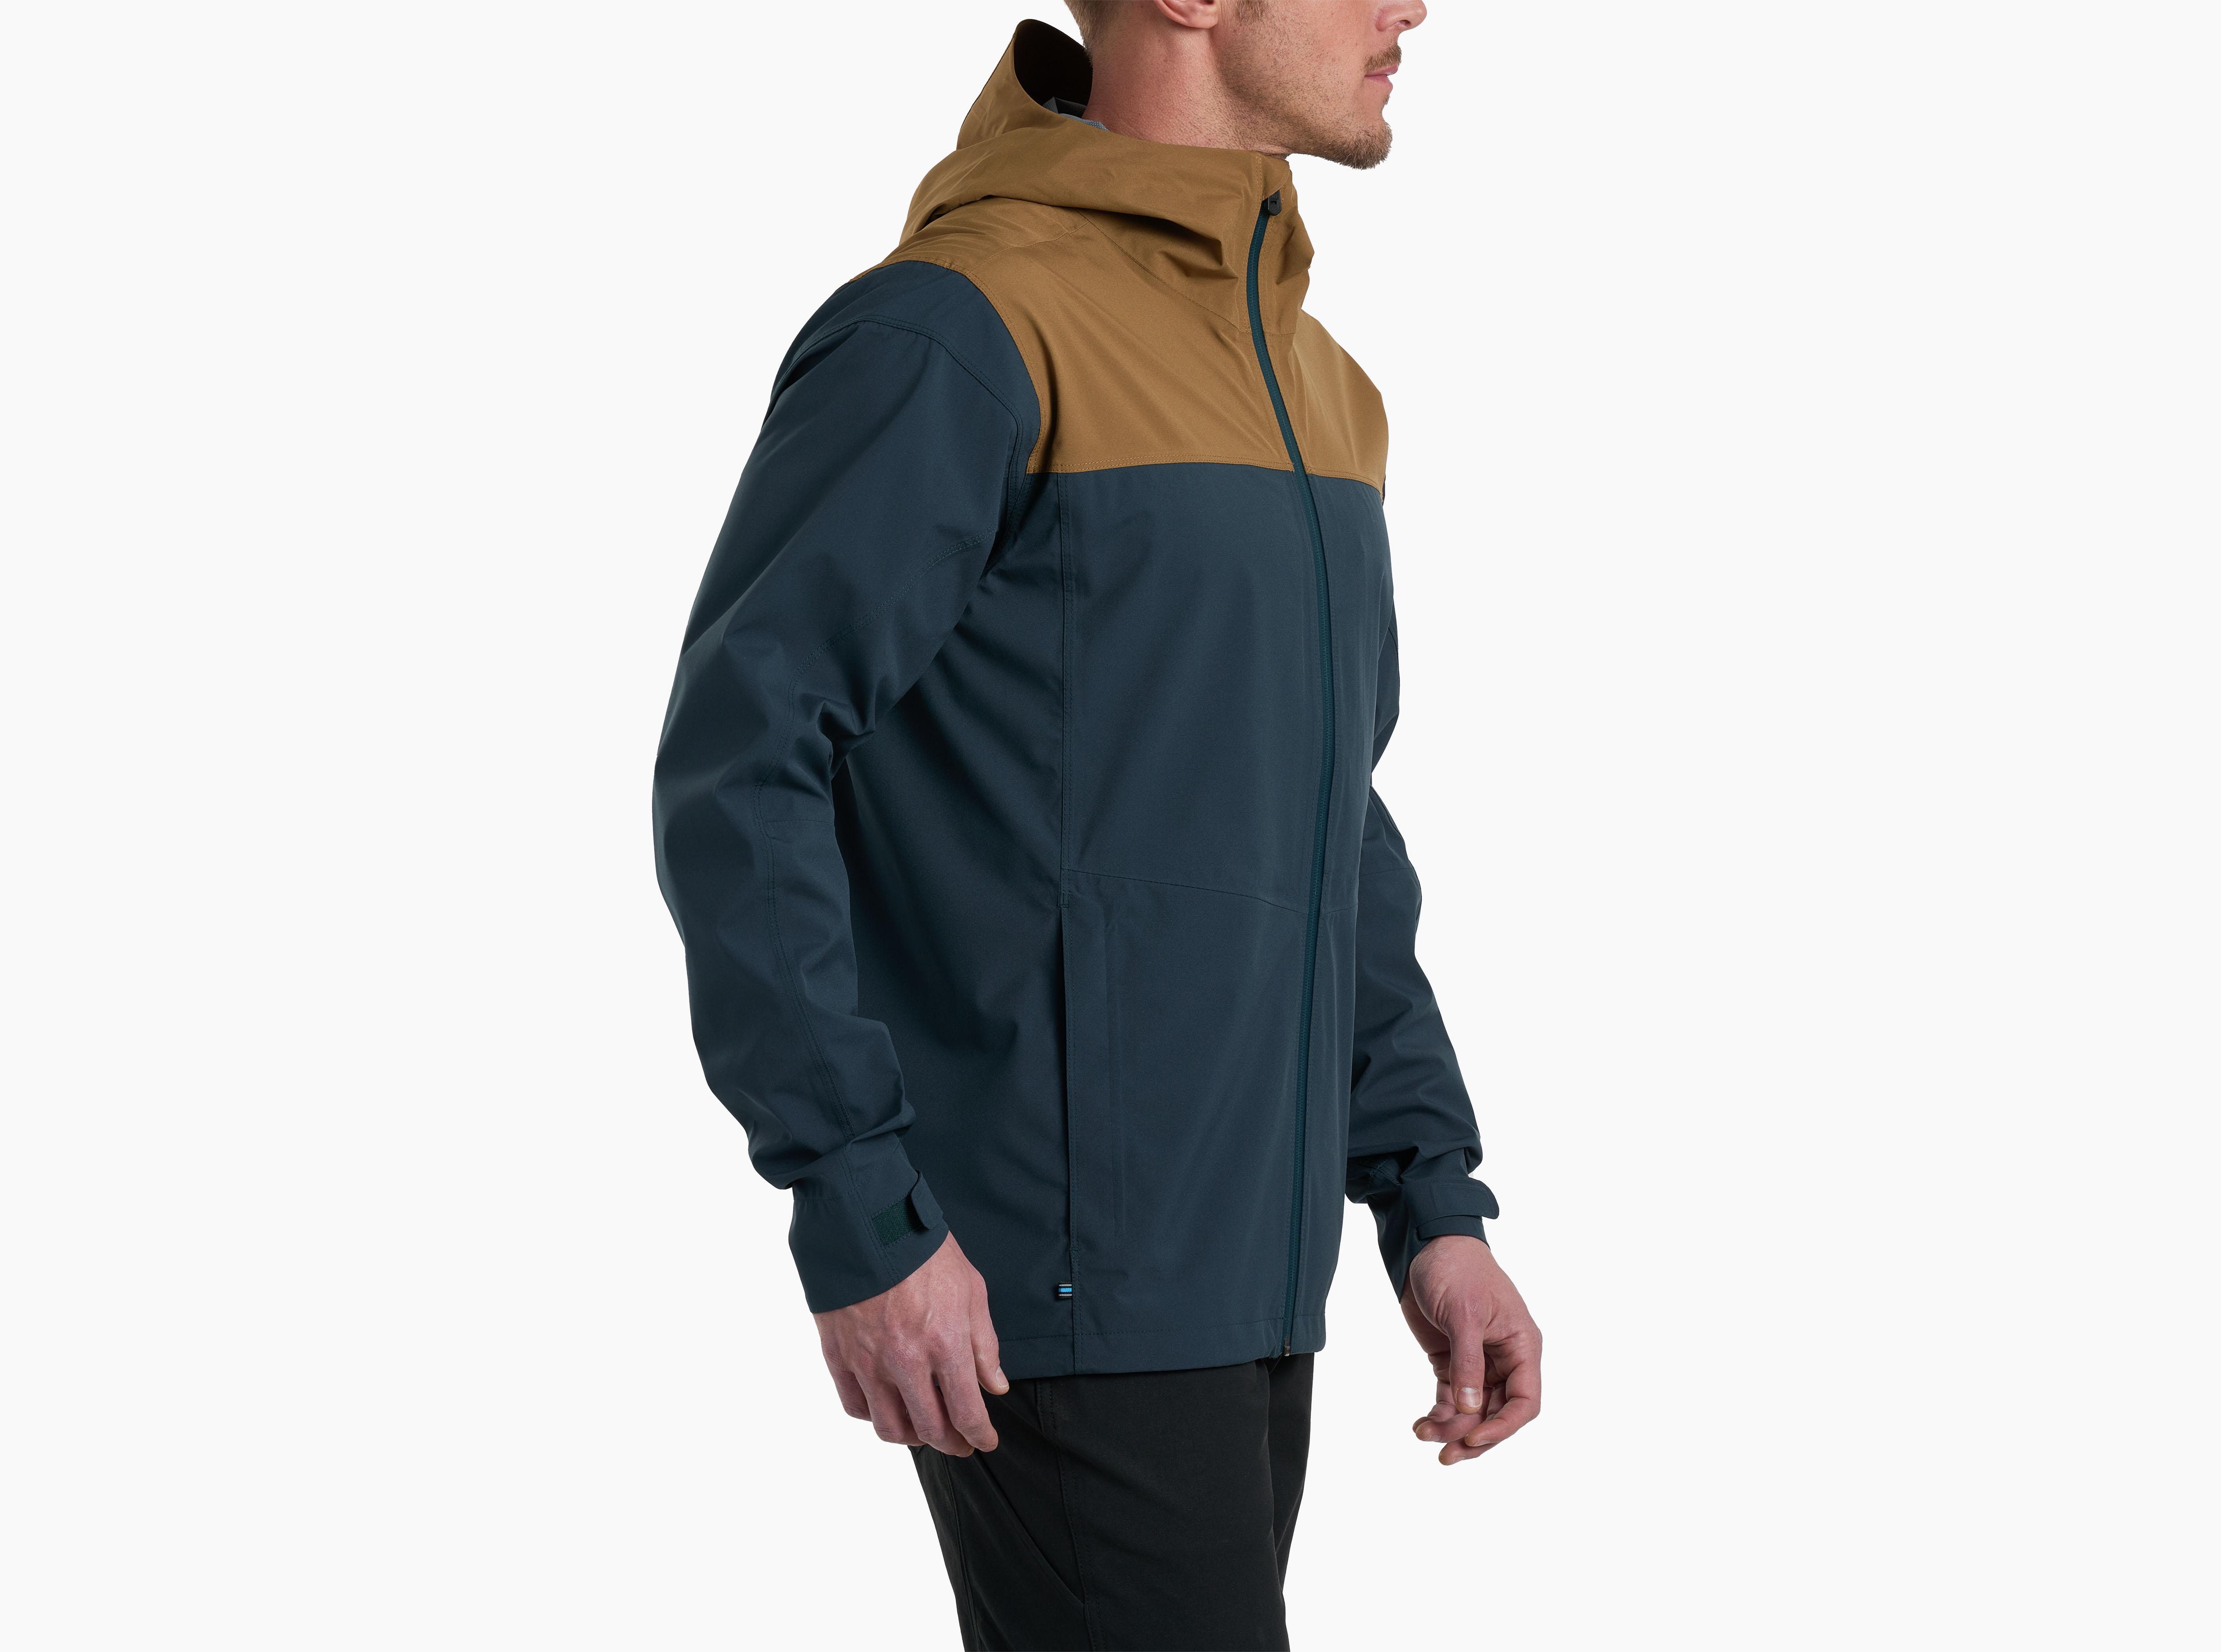 Tackle World & Outdoors Burnie - Introducing the KÜHL Stretch Voyagr Jacket!  🤩 100% Waterproof & Stylish, this is the super comfortable rain jacket,  you will want to wear even when it